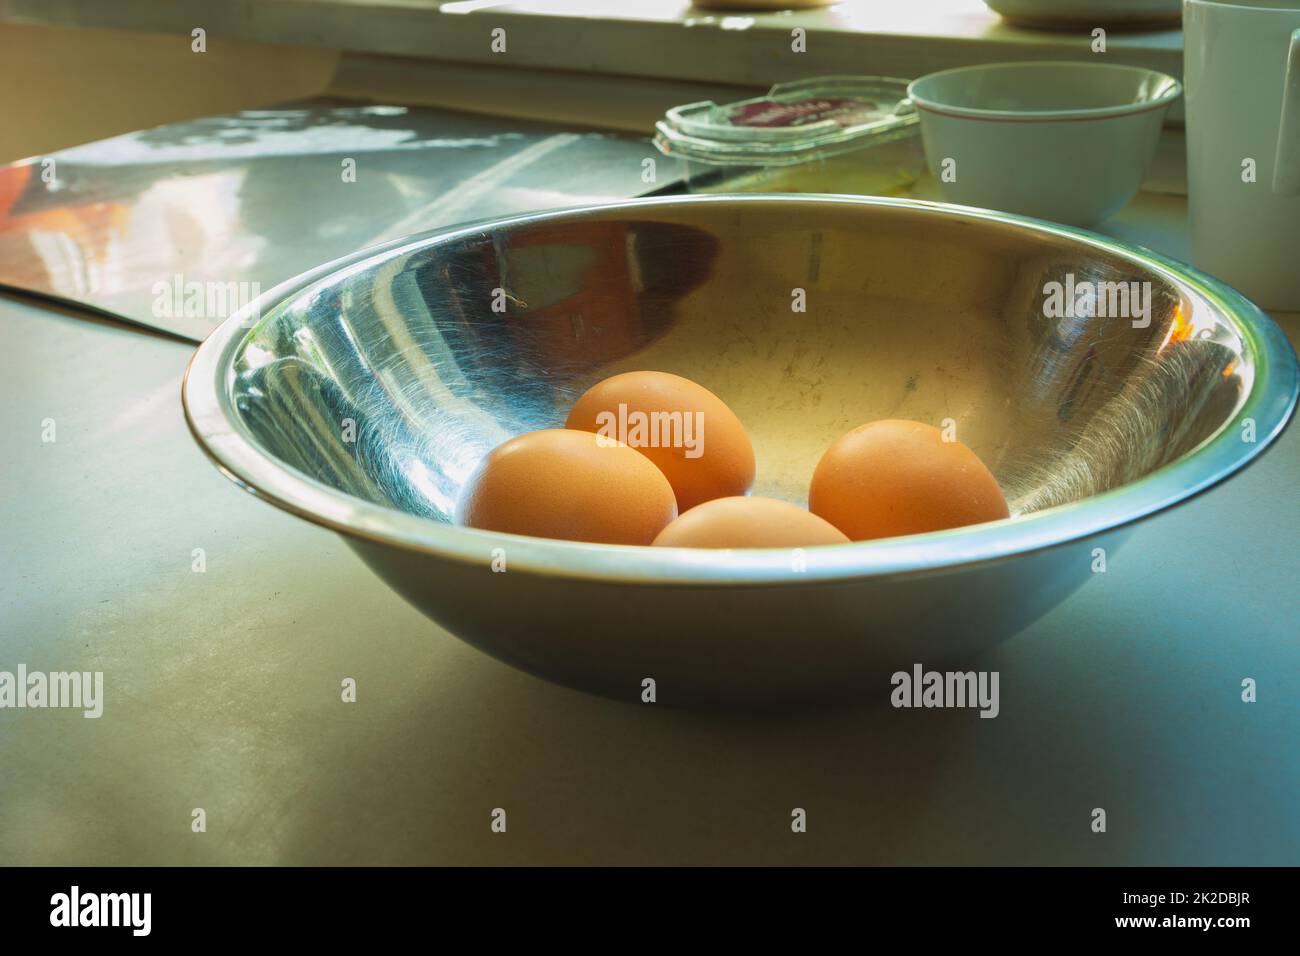 Chicken eggs in an aluminum bowl on the countertop Stock Photo